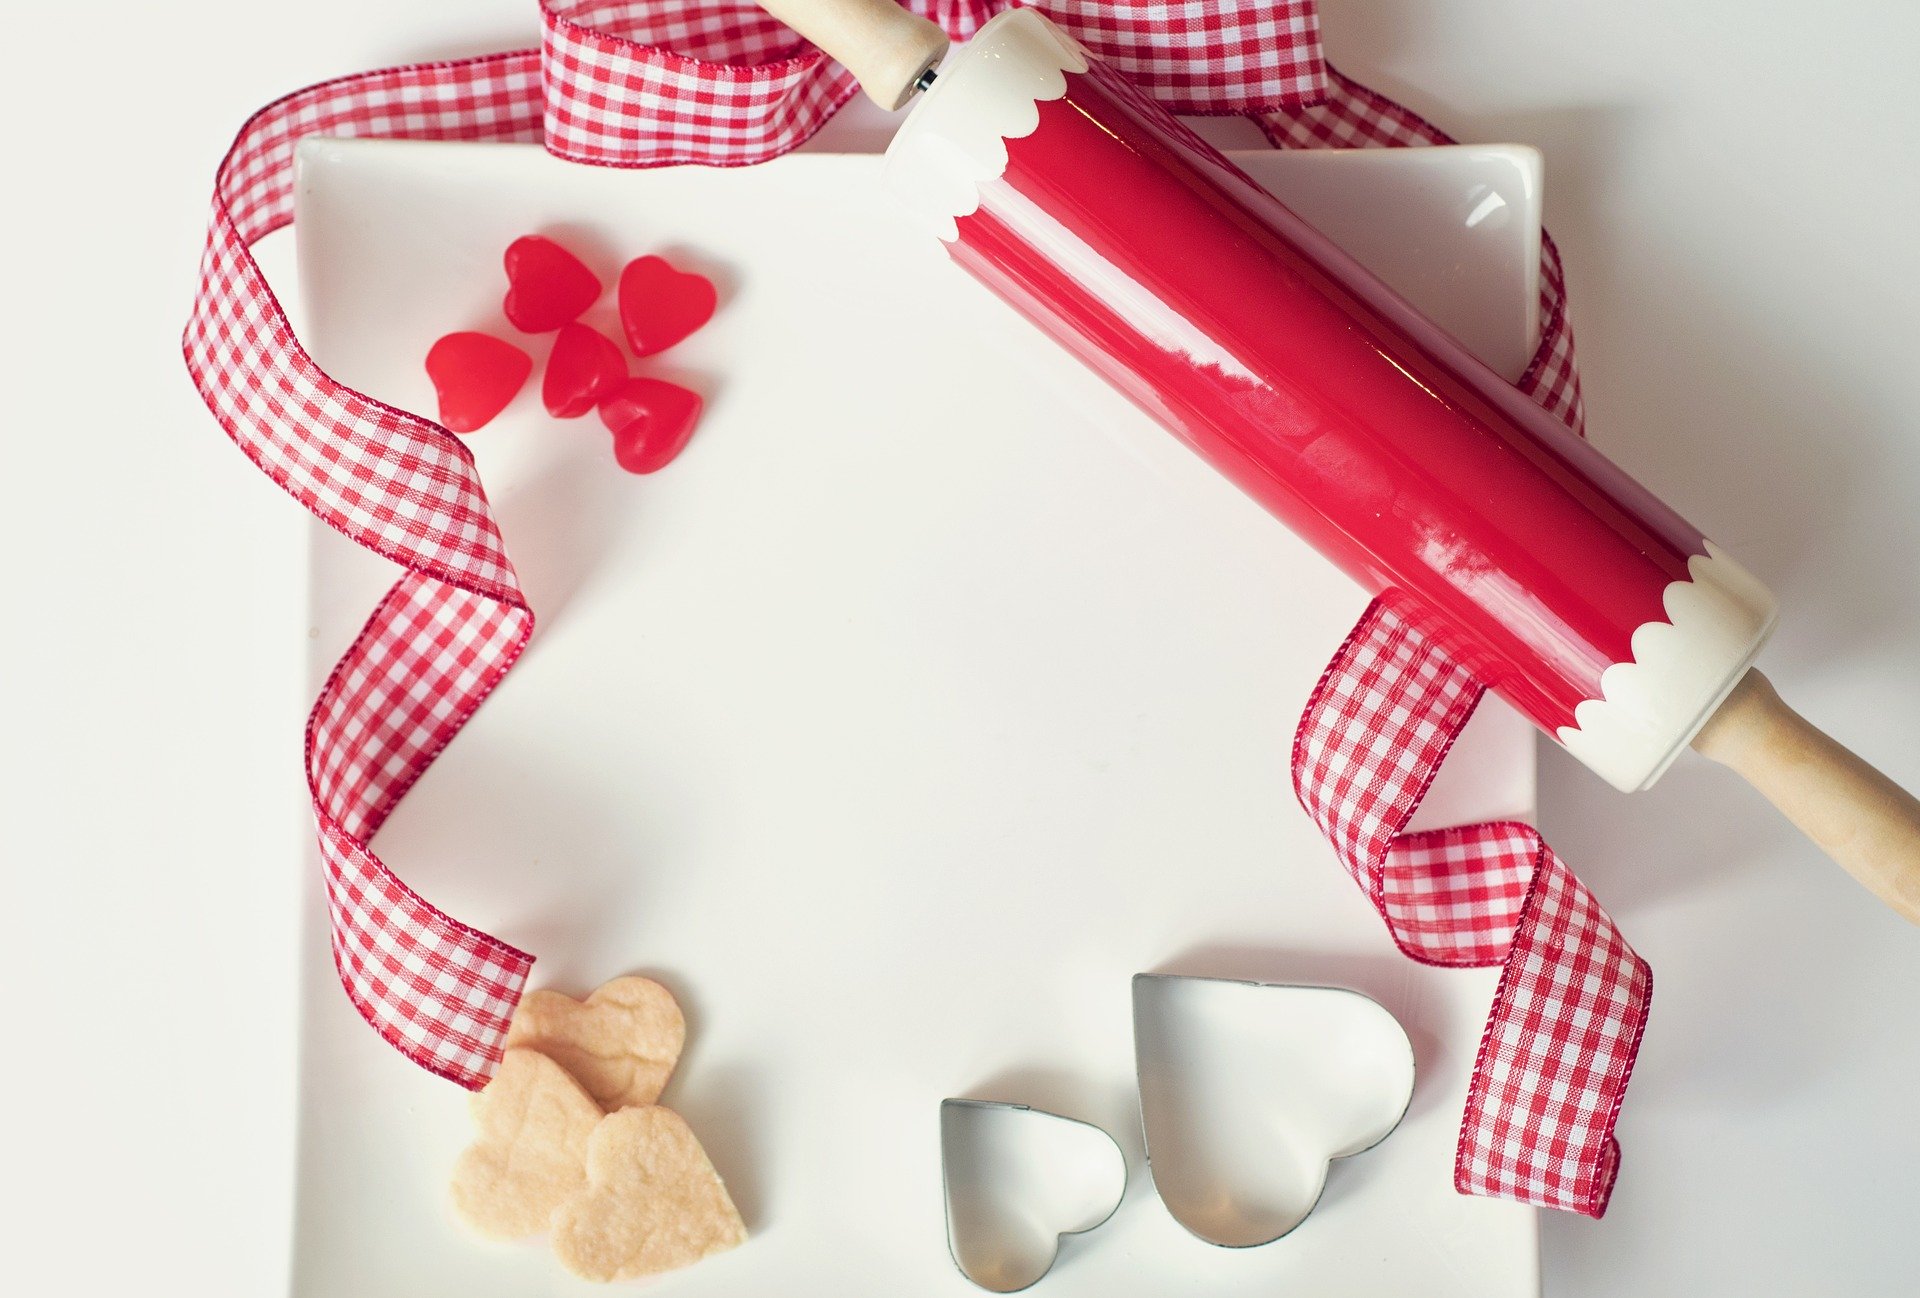 A red and white gingham ribbon on a plate, with a red and white rolling pin, heart shaped sweets, 2 heart cookie cutters and 3 hearts shaped cookies.